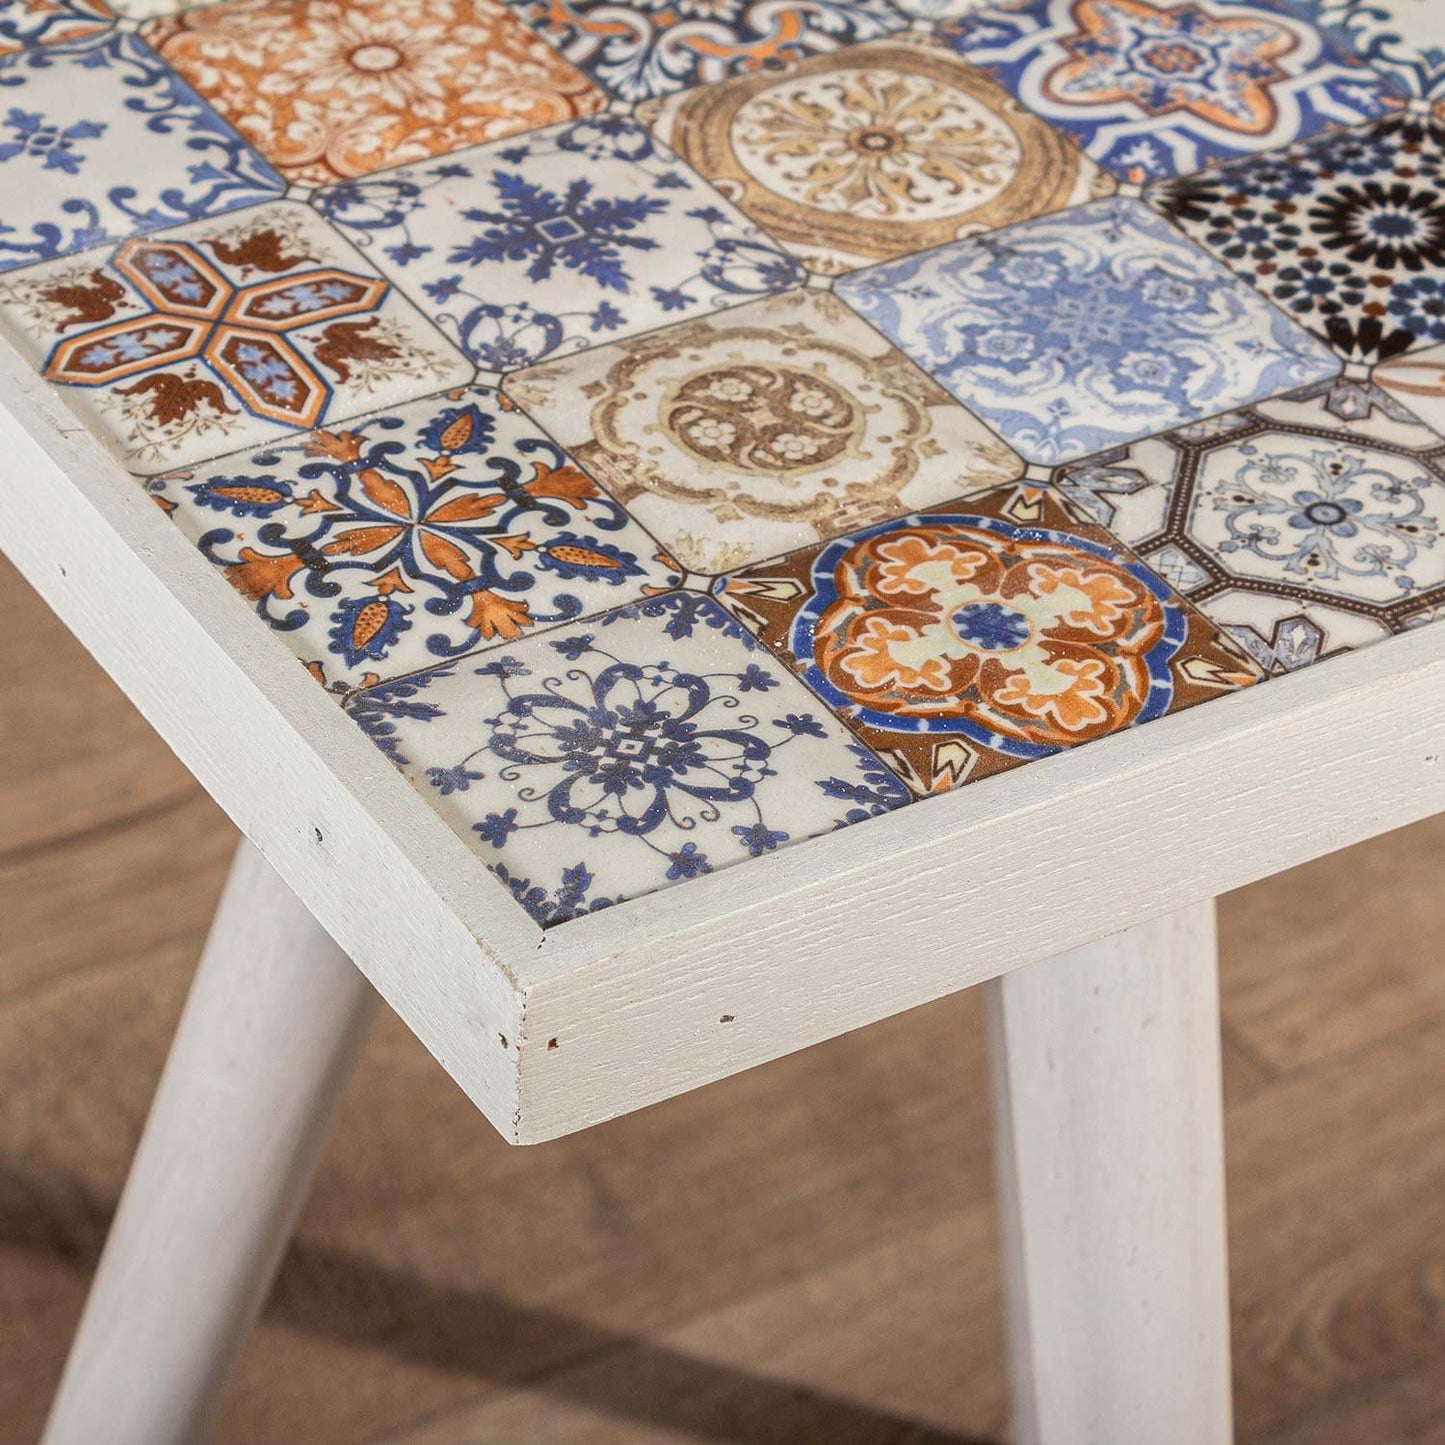 Artisan Crafted Ceramic Coffee Table